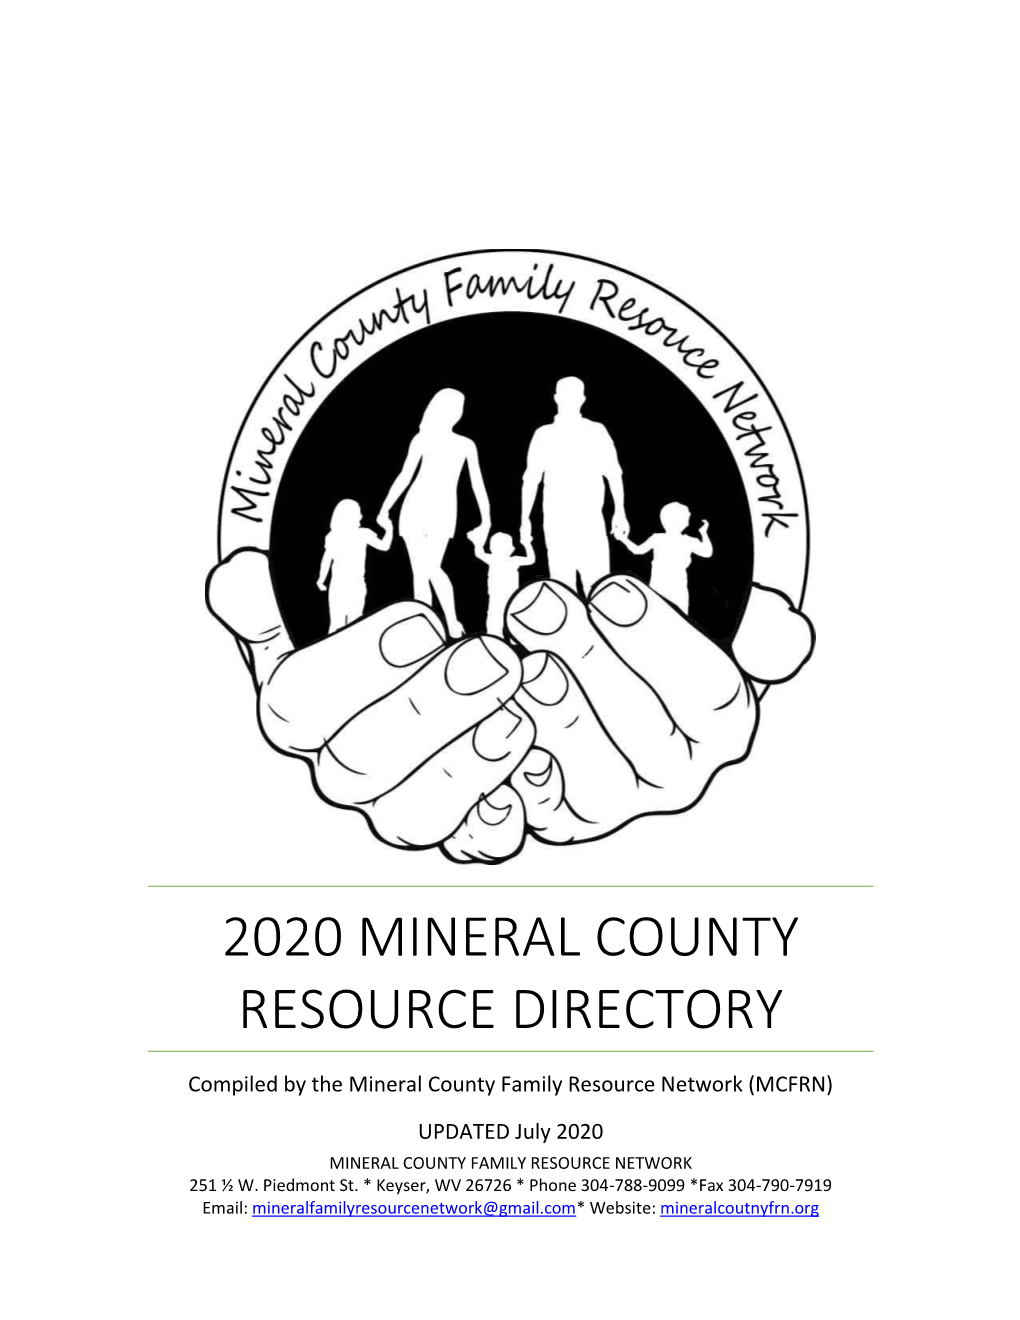 2020 Mineral County Resource Directory